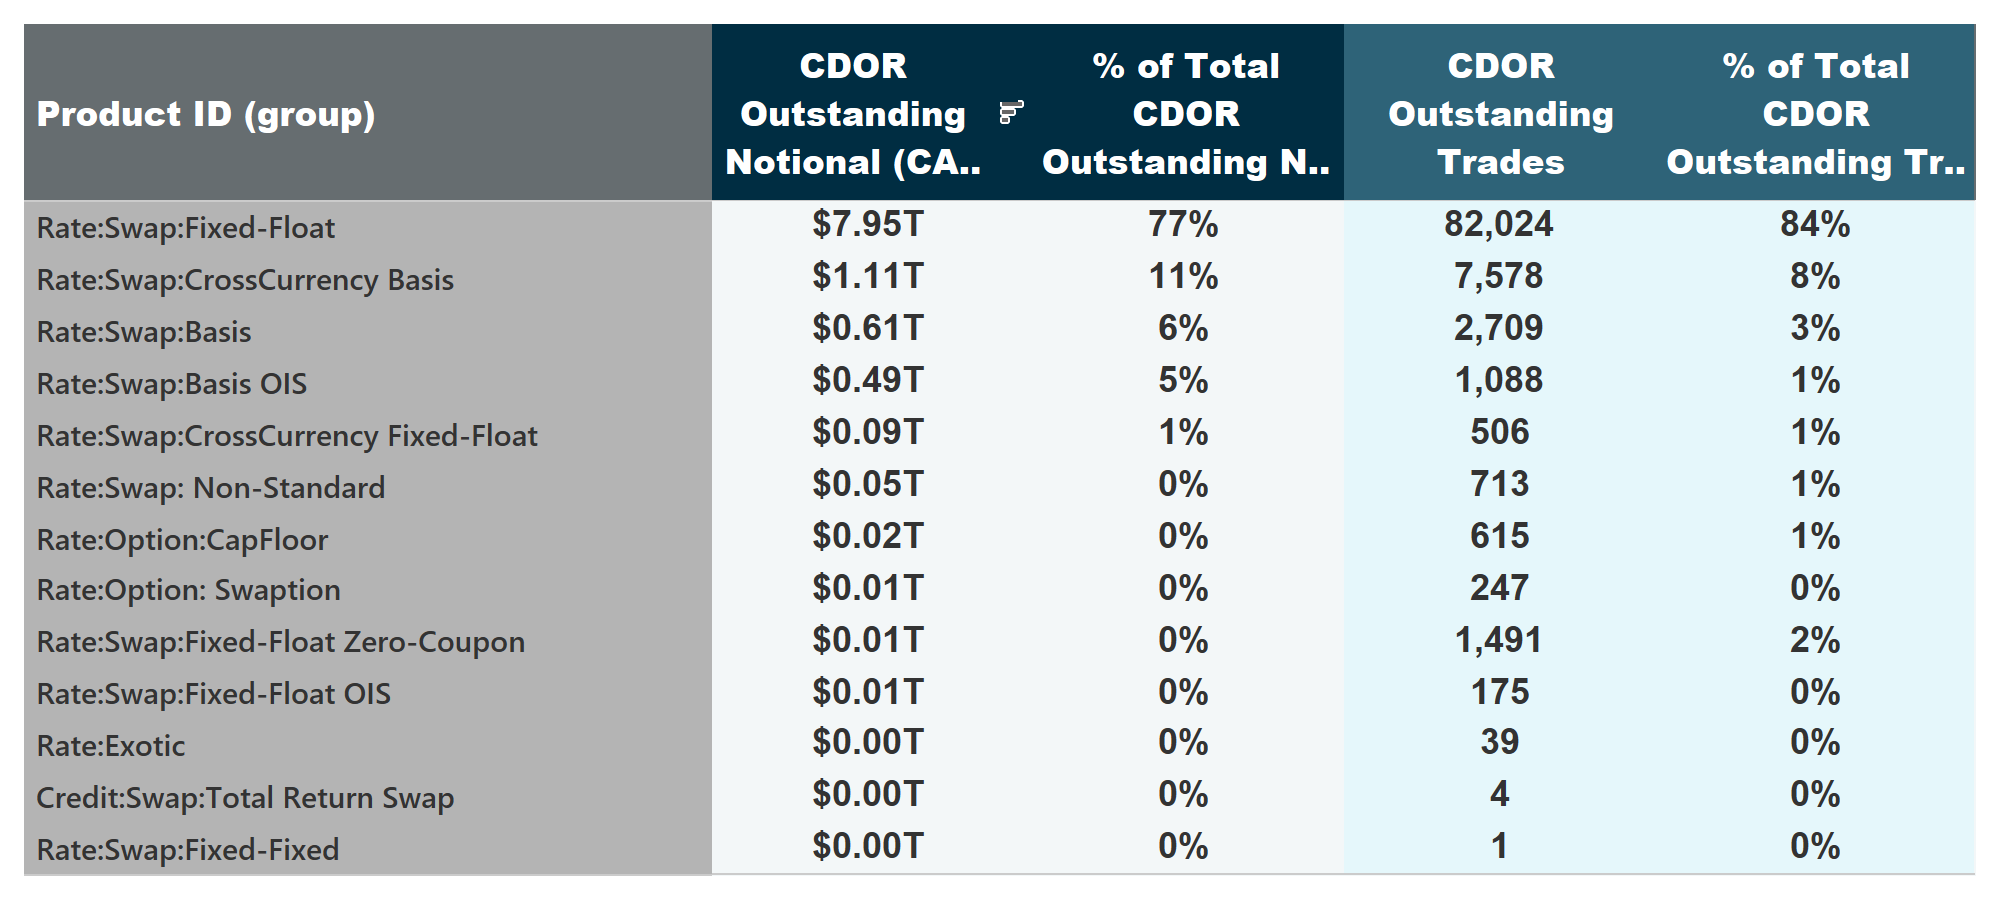 Outstanding notional and number of outstanding trades by product type